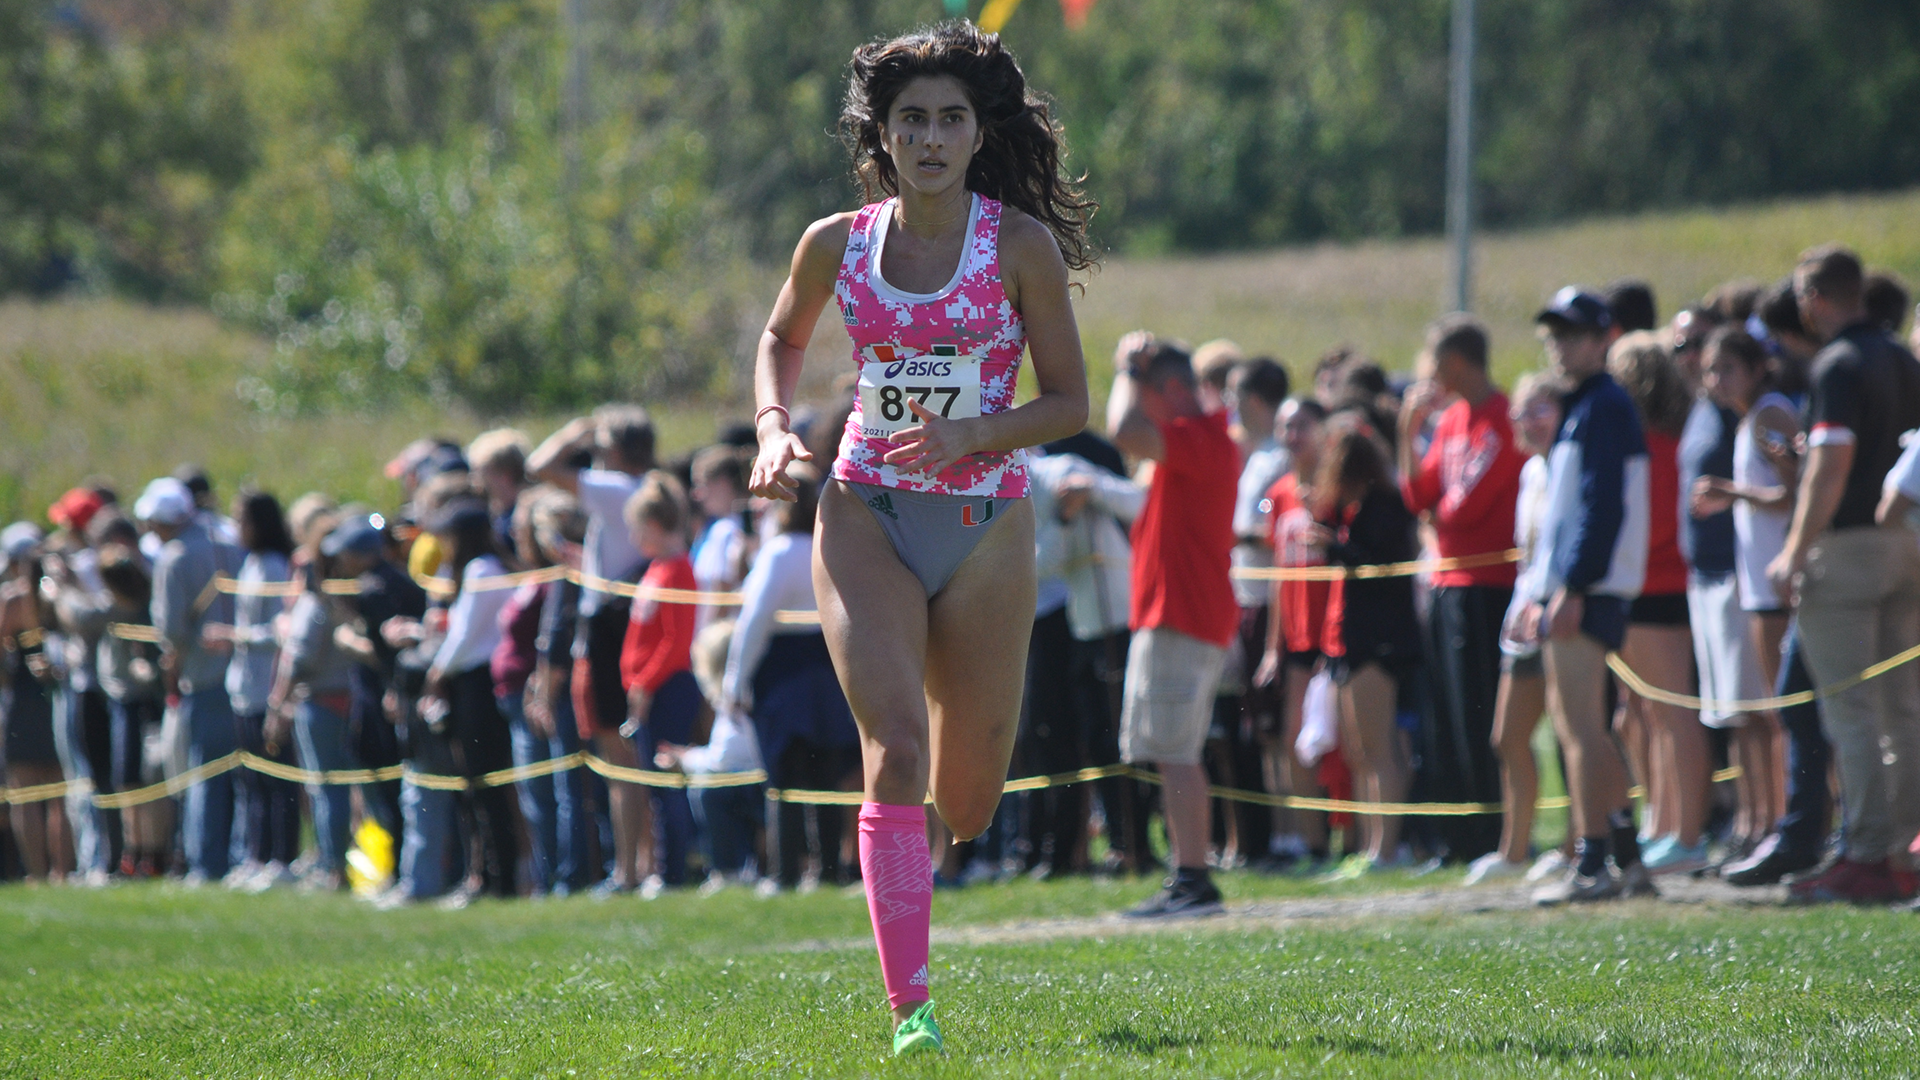 Women Have Historic Day at Regionals